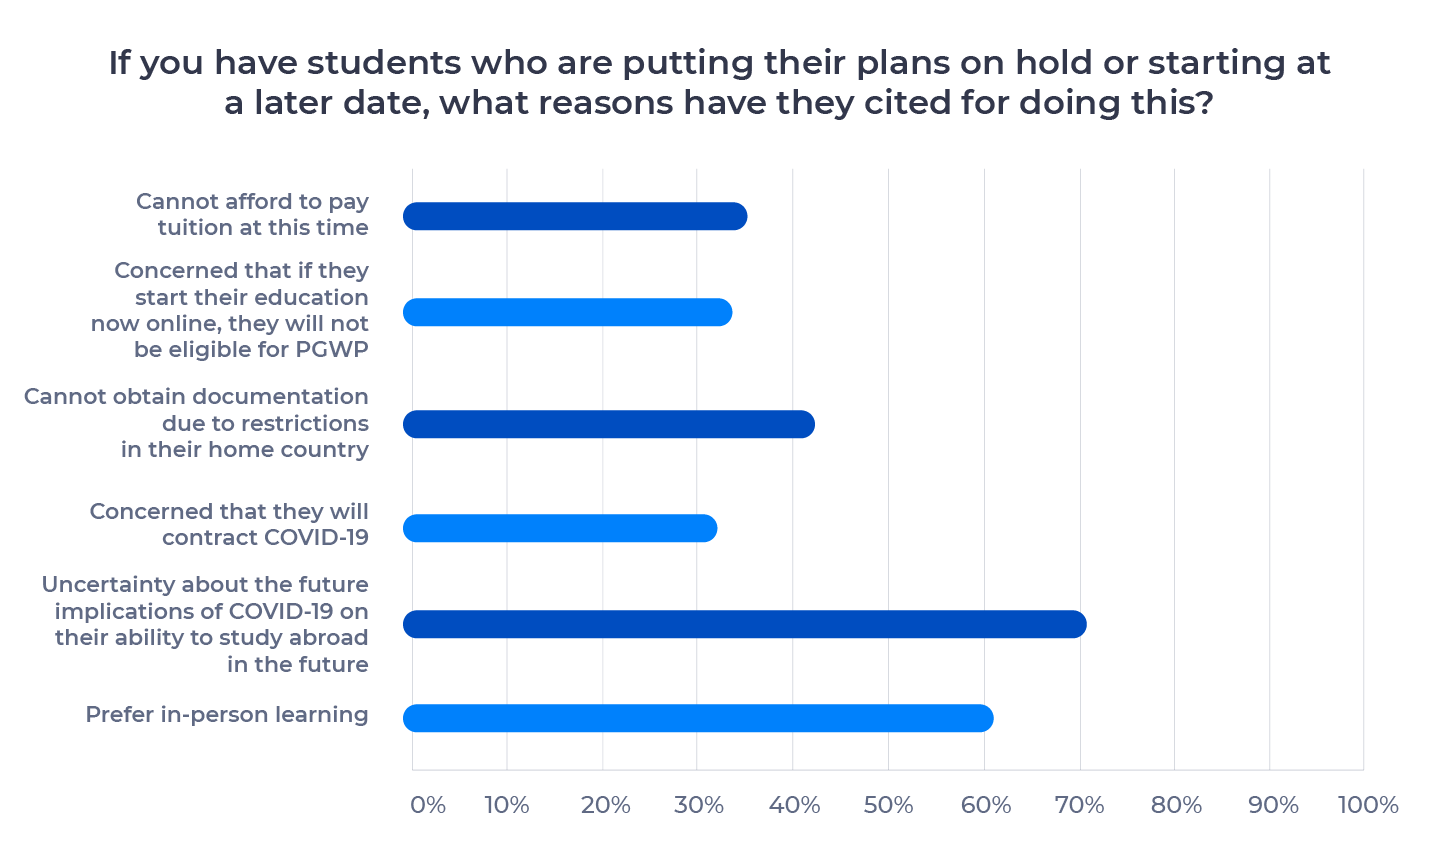 Bar chart showing reasons international students have cited for putting their plans or hold or starting at a later date. Examined in detail below.